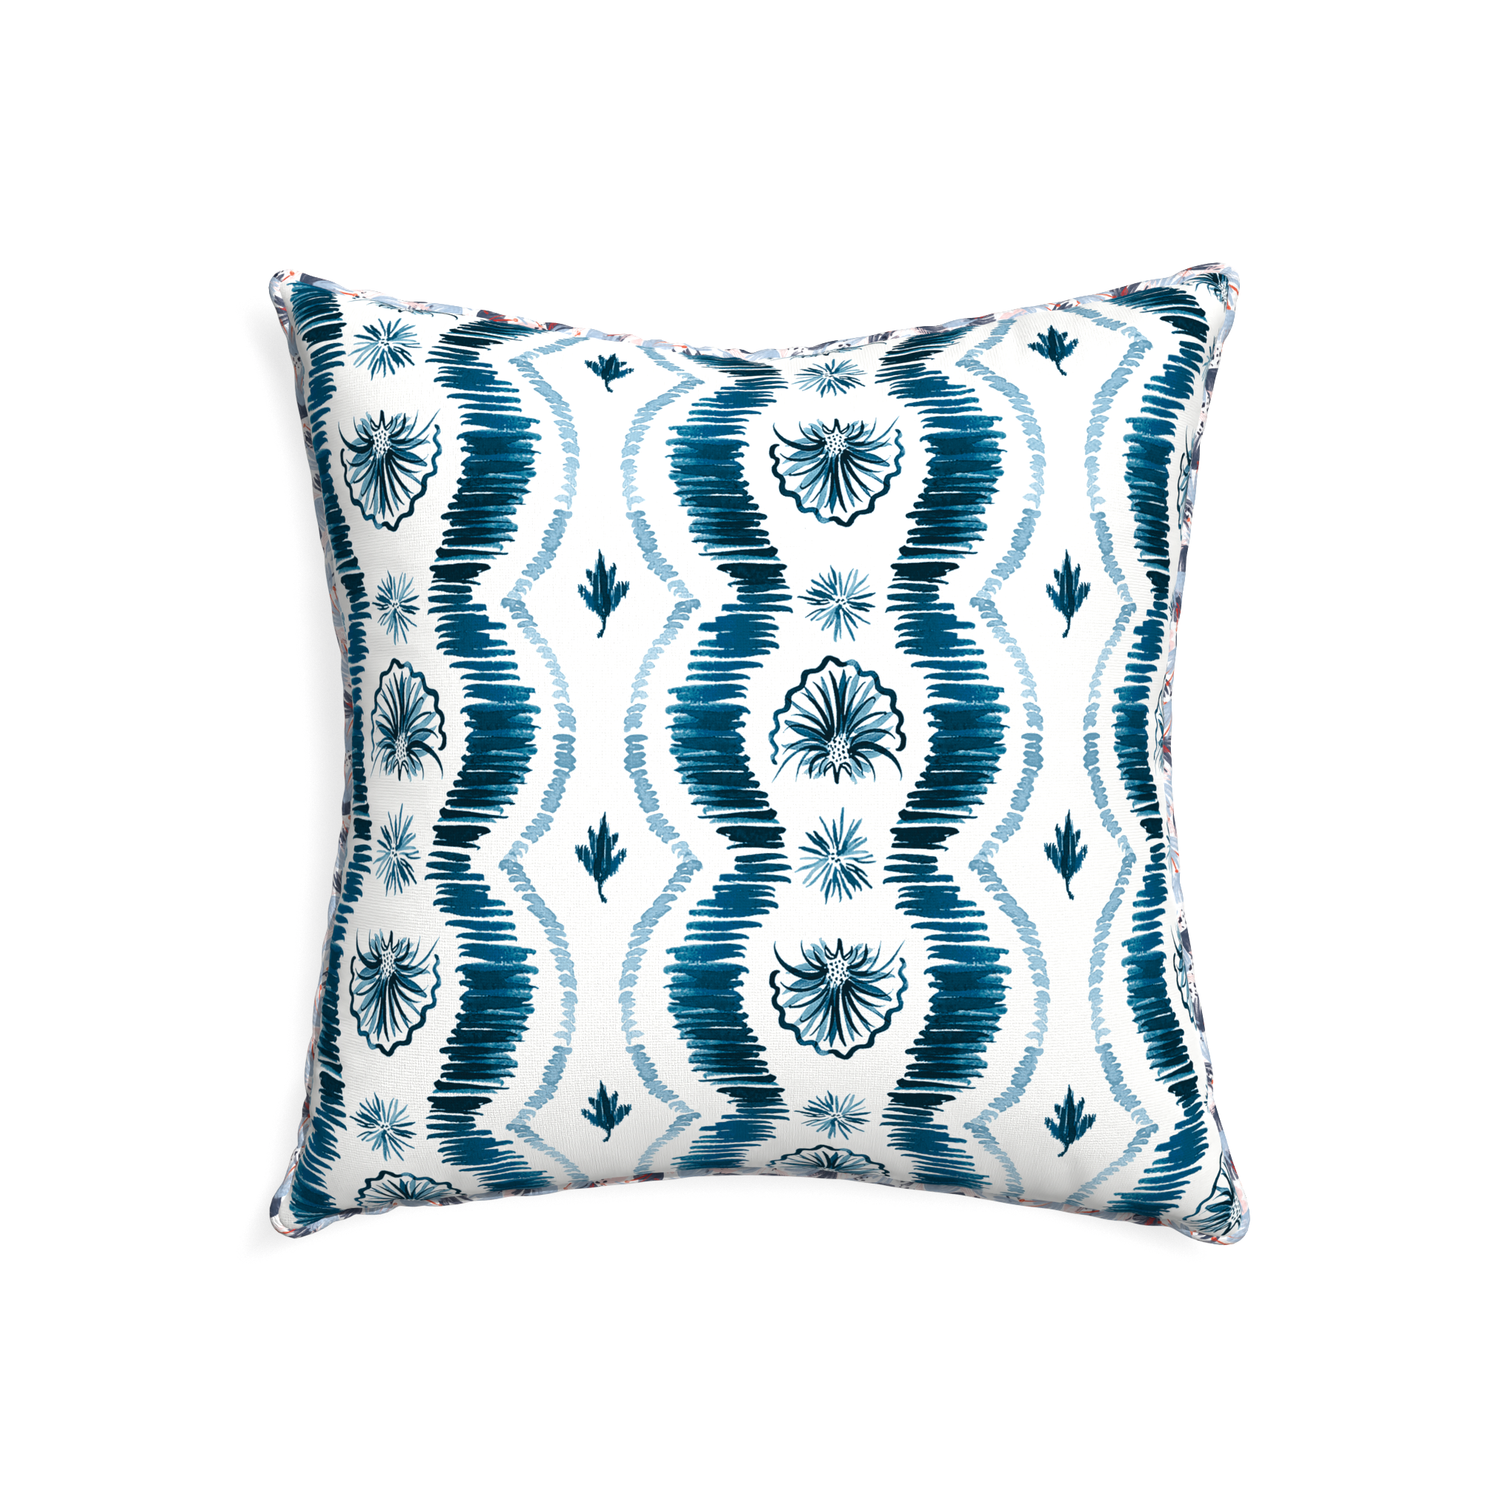 22-square alice custom blue ikatpillow with e piping on white background